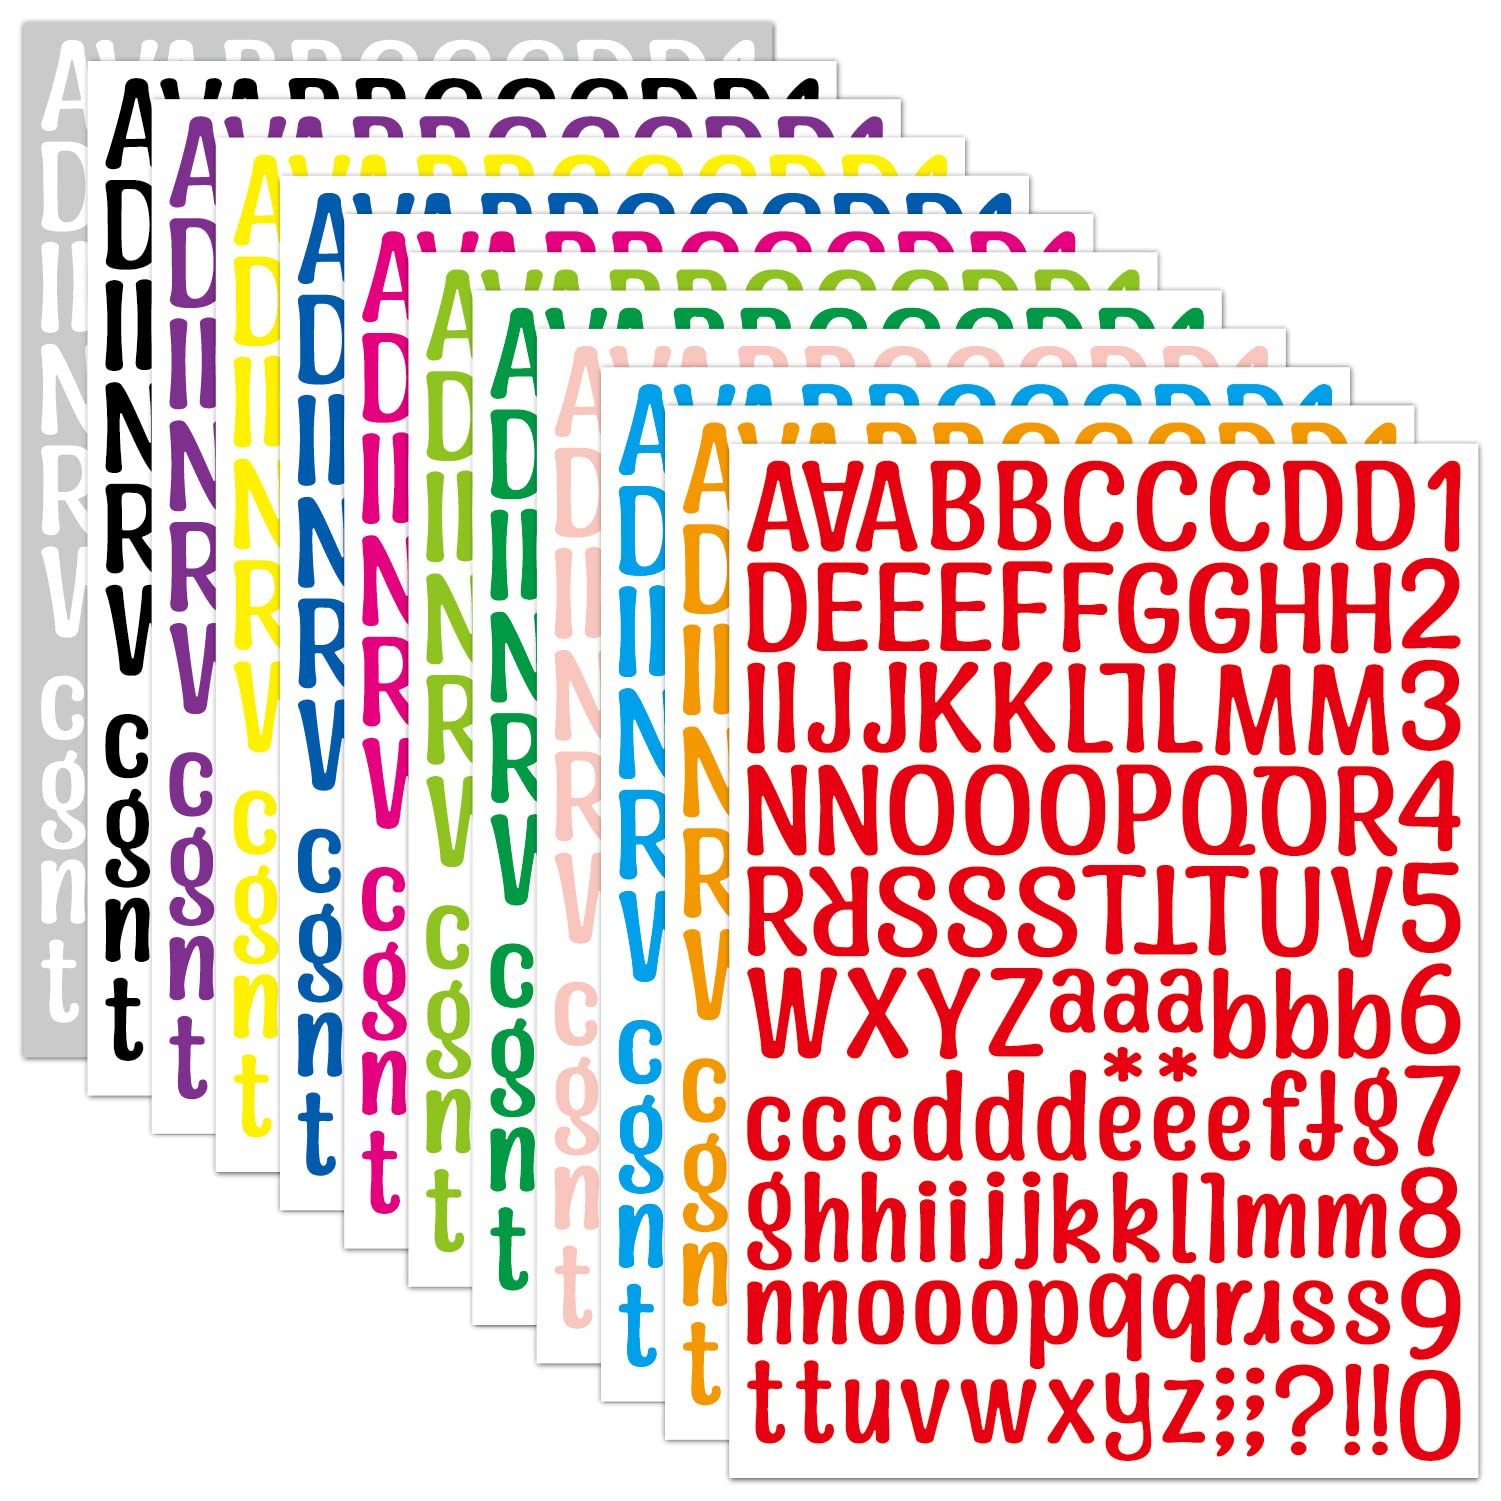  PUVATY 1 Inch 1512 Pieces 12 Sheets Graduation Cap Letter  Stickers, Self-Adhesive Vinyl Letter Sticker, Alphabet Number Stickers,  Decals for Sign, Business, Mailbox,Crafts (Holographic 4 Colors Set) :  Arts, Crafts & Sewing